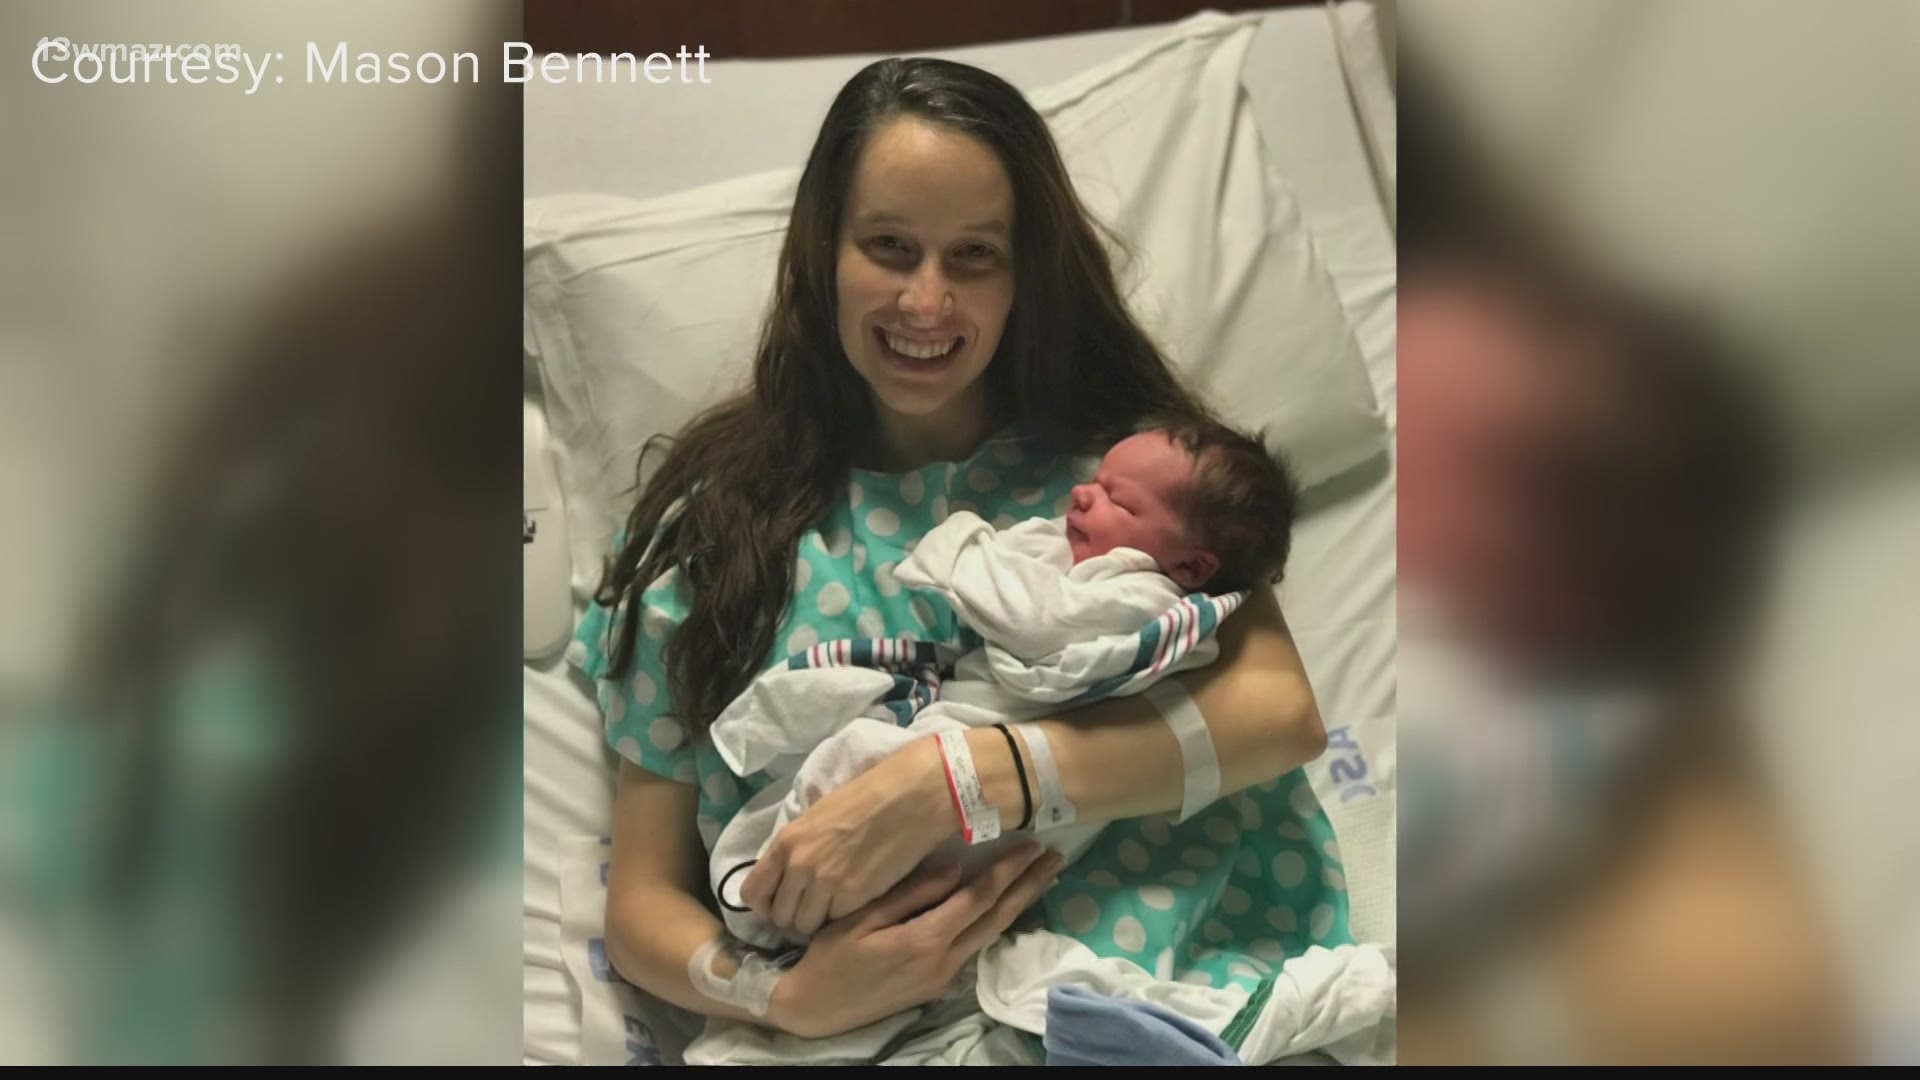 In Houston County, a former paramedic stepped up to help deliver a baby in the backseat of a car.